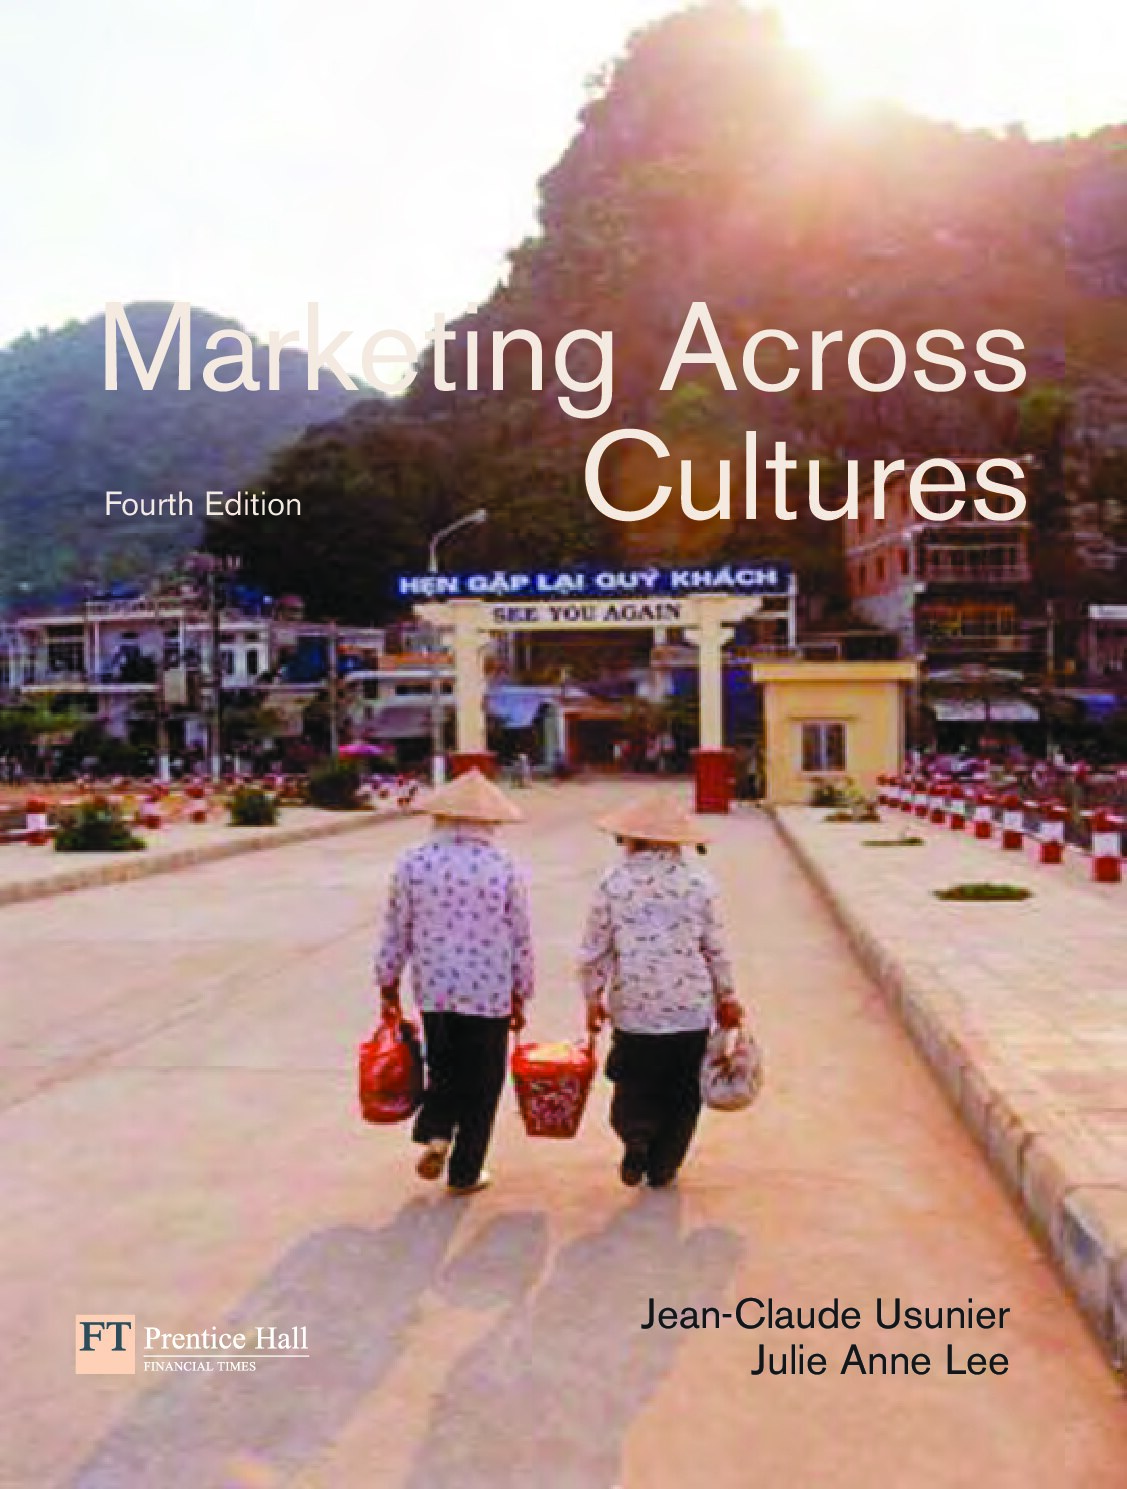 Marketing Across Cultures (4th Edition)